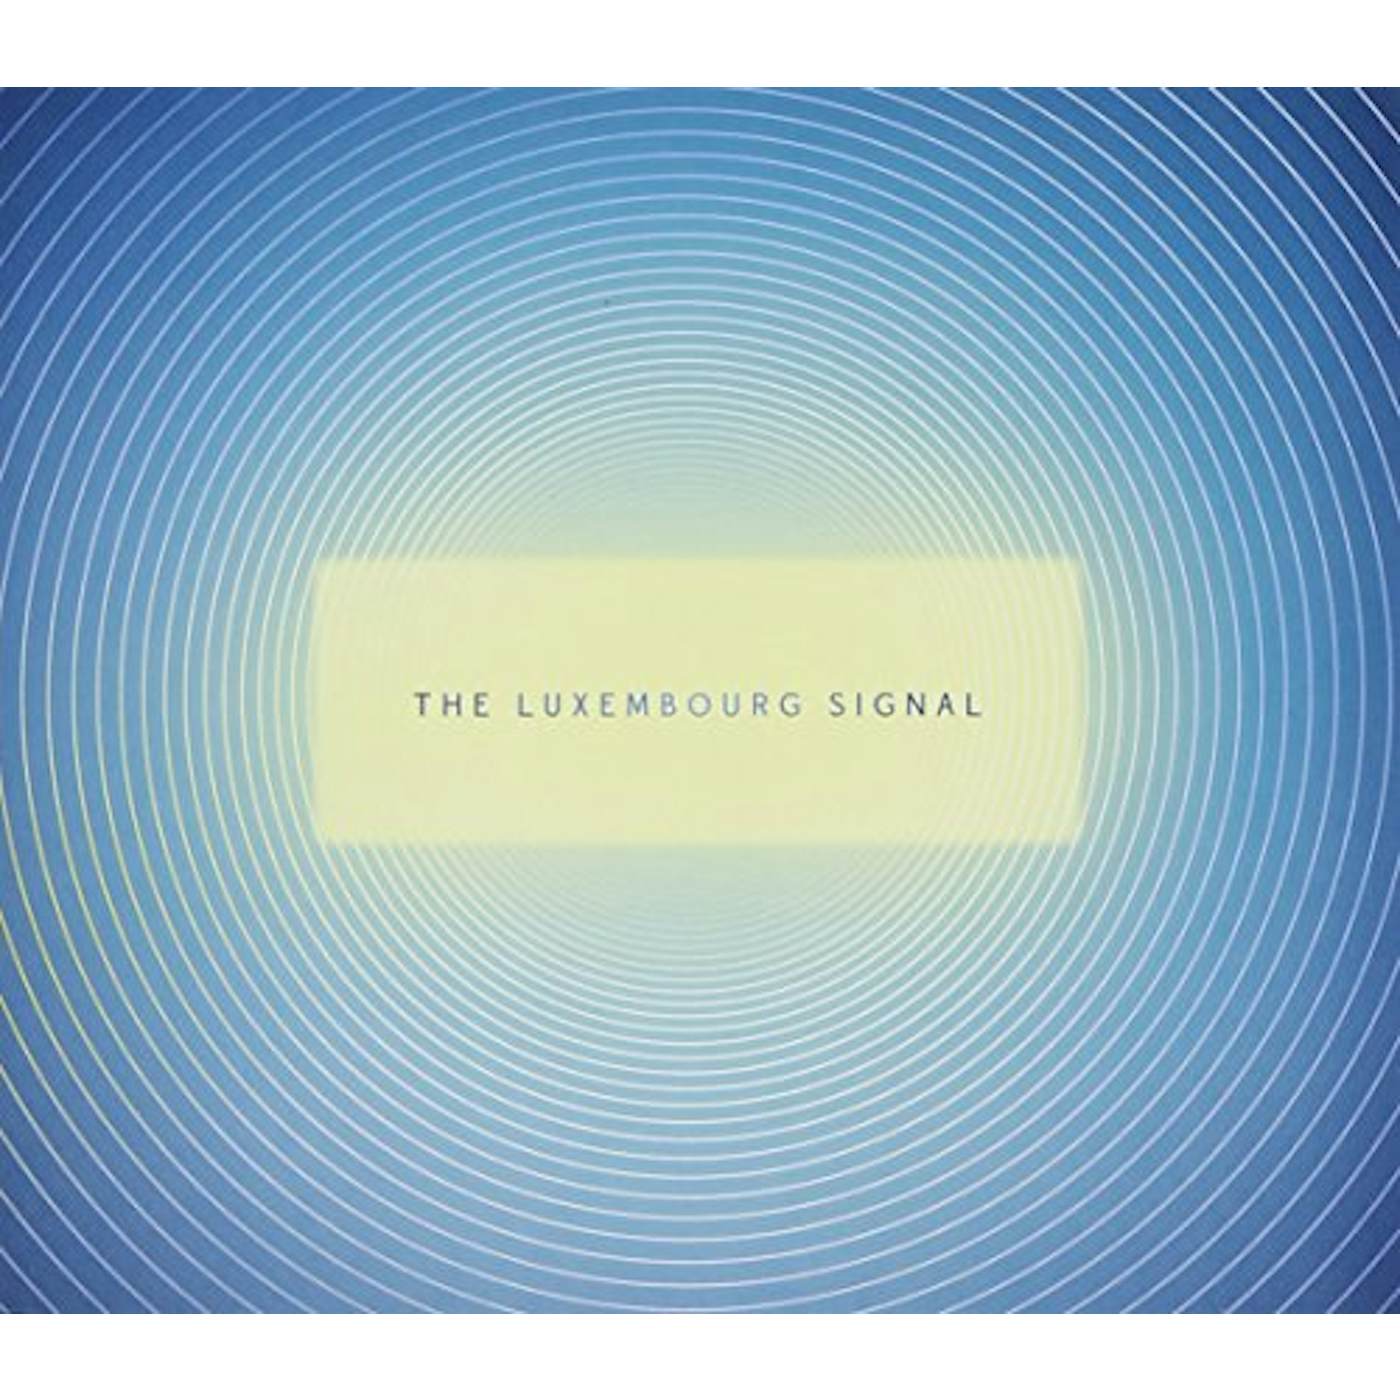 The Luxembourg Signal CD